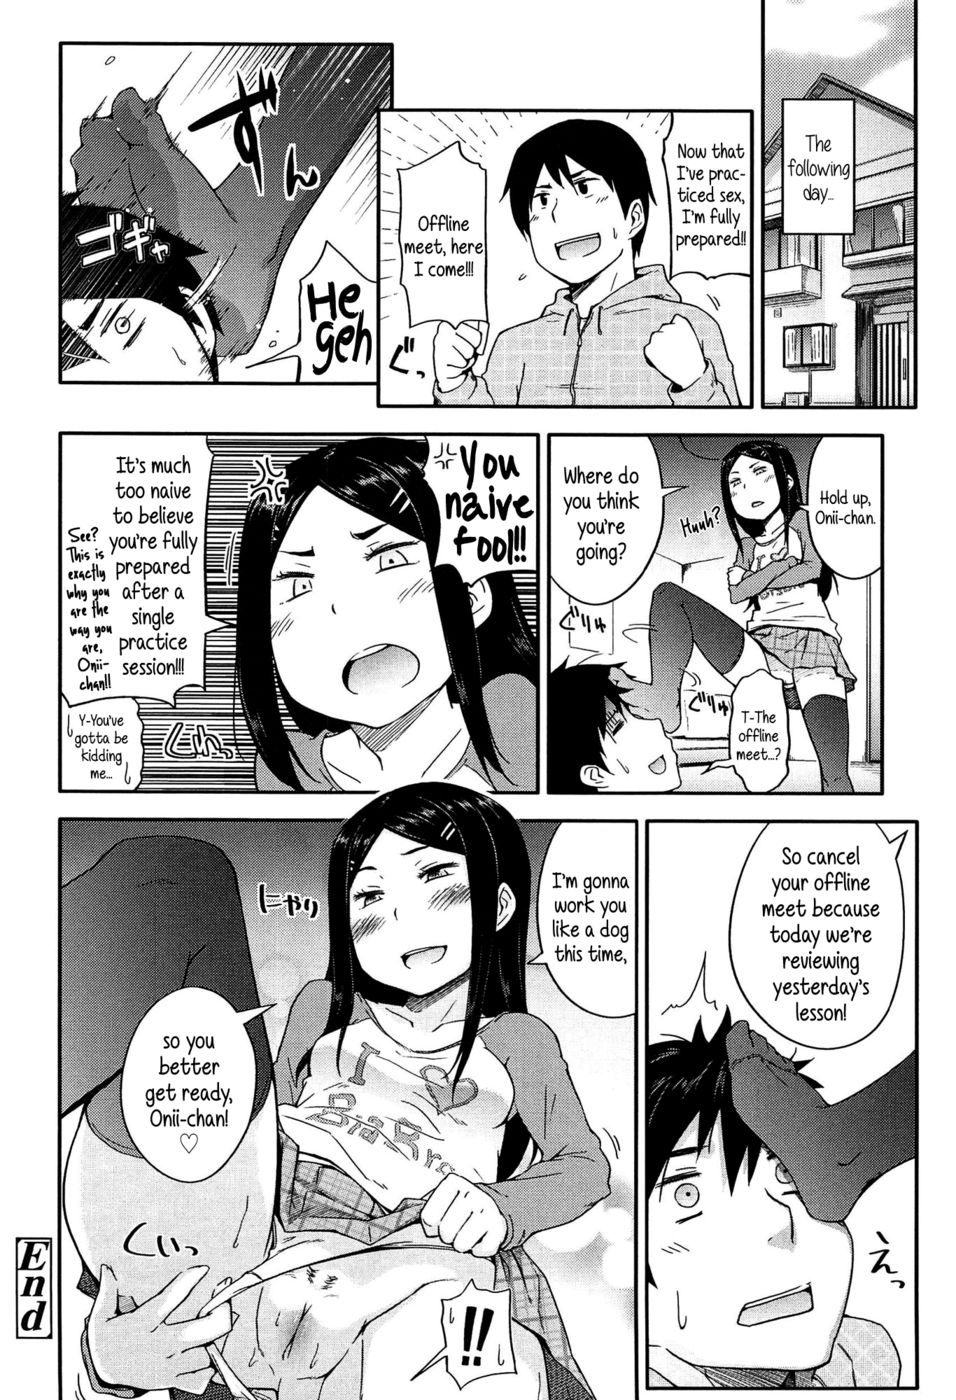 I Know, I'll Practice With my Little Sister.-Read-Hentai Manga ...